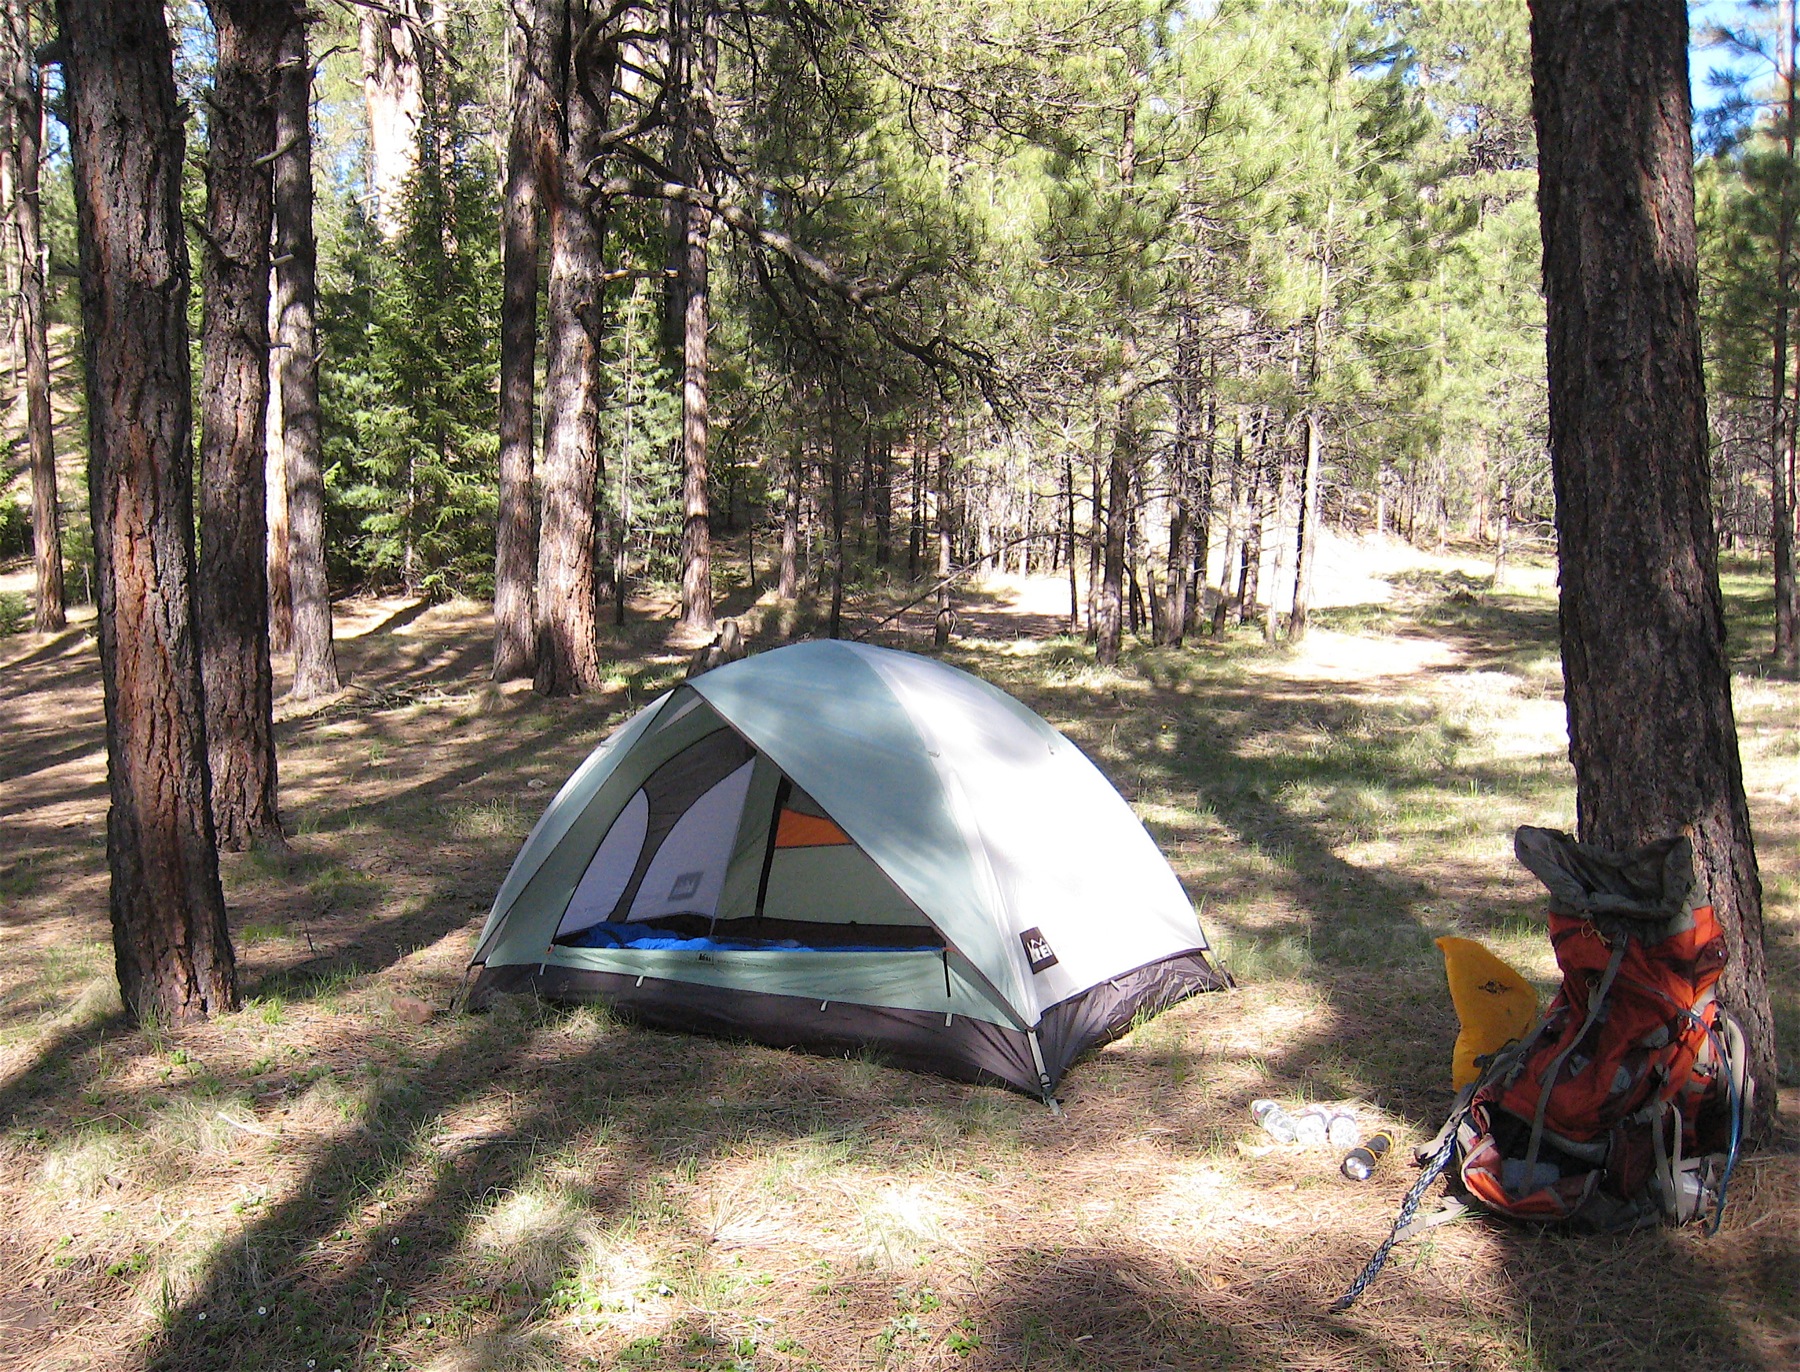 a tent in the middle of a wooded area with trees